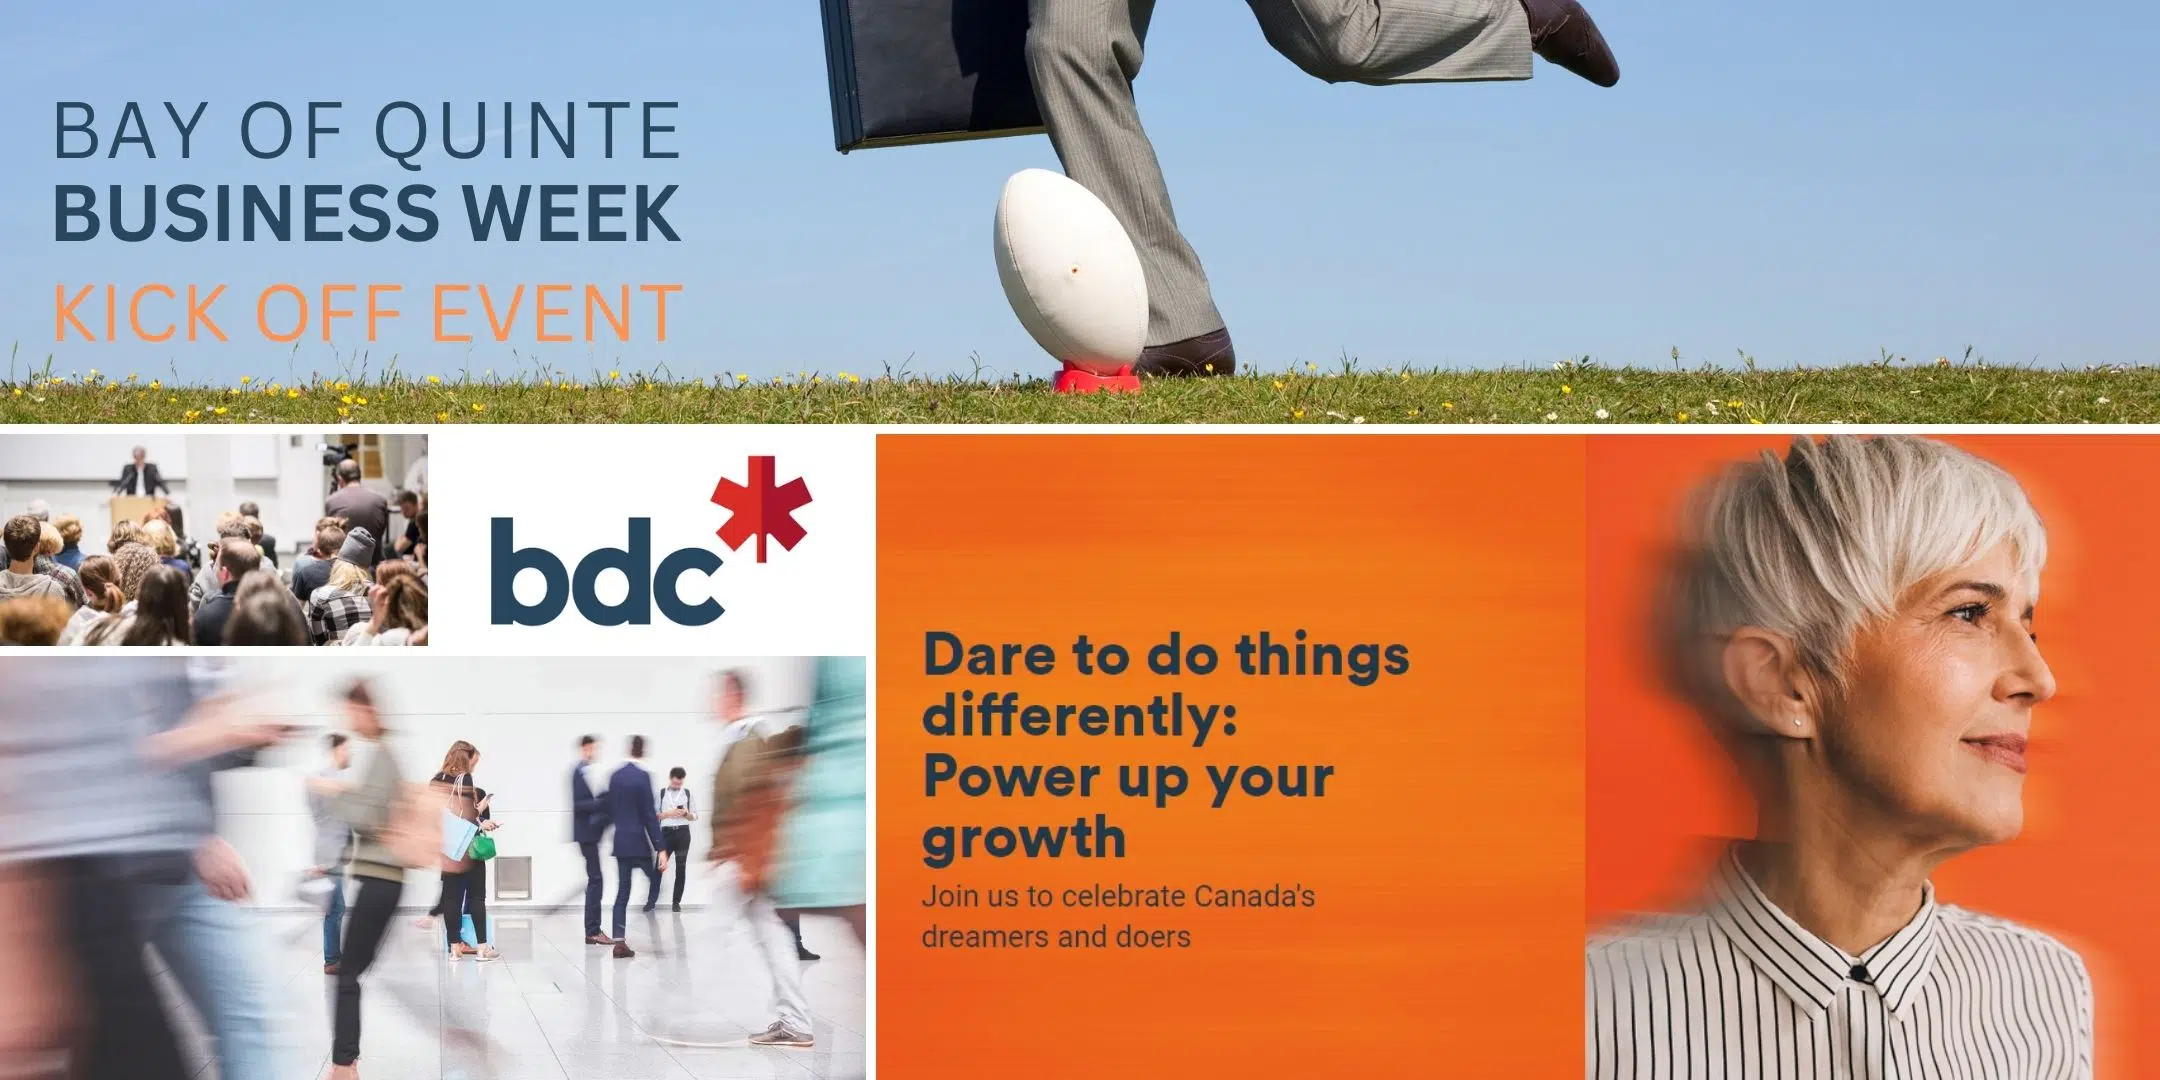 Small Business Week kicks off in the Bay of Quinte